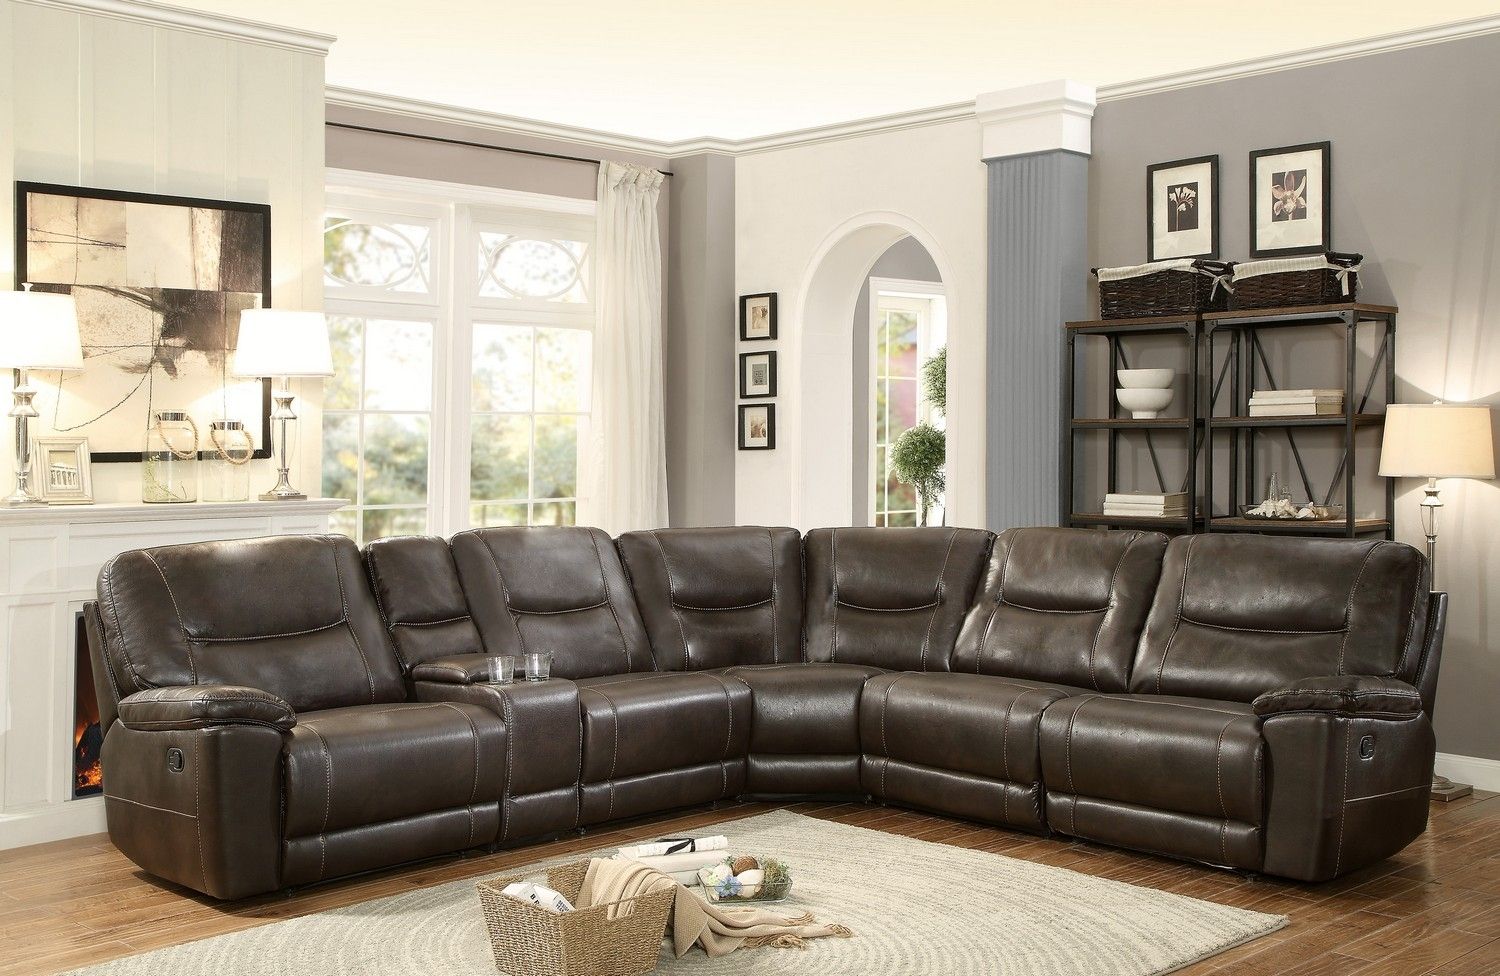 Homelegance Columbus Reclining Sectional Sofa Set D – Breathable With Regard To Huntsville Al Sectional Sofas (View 6 of 10)